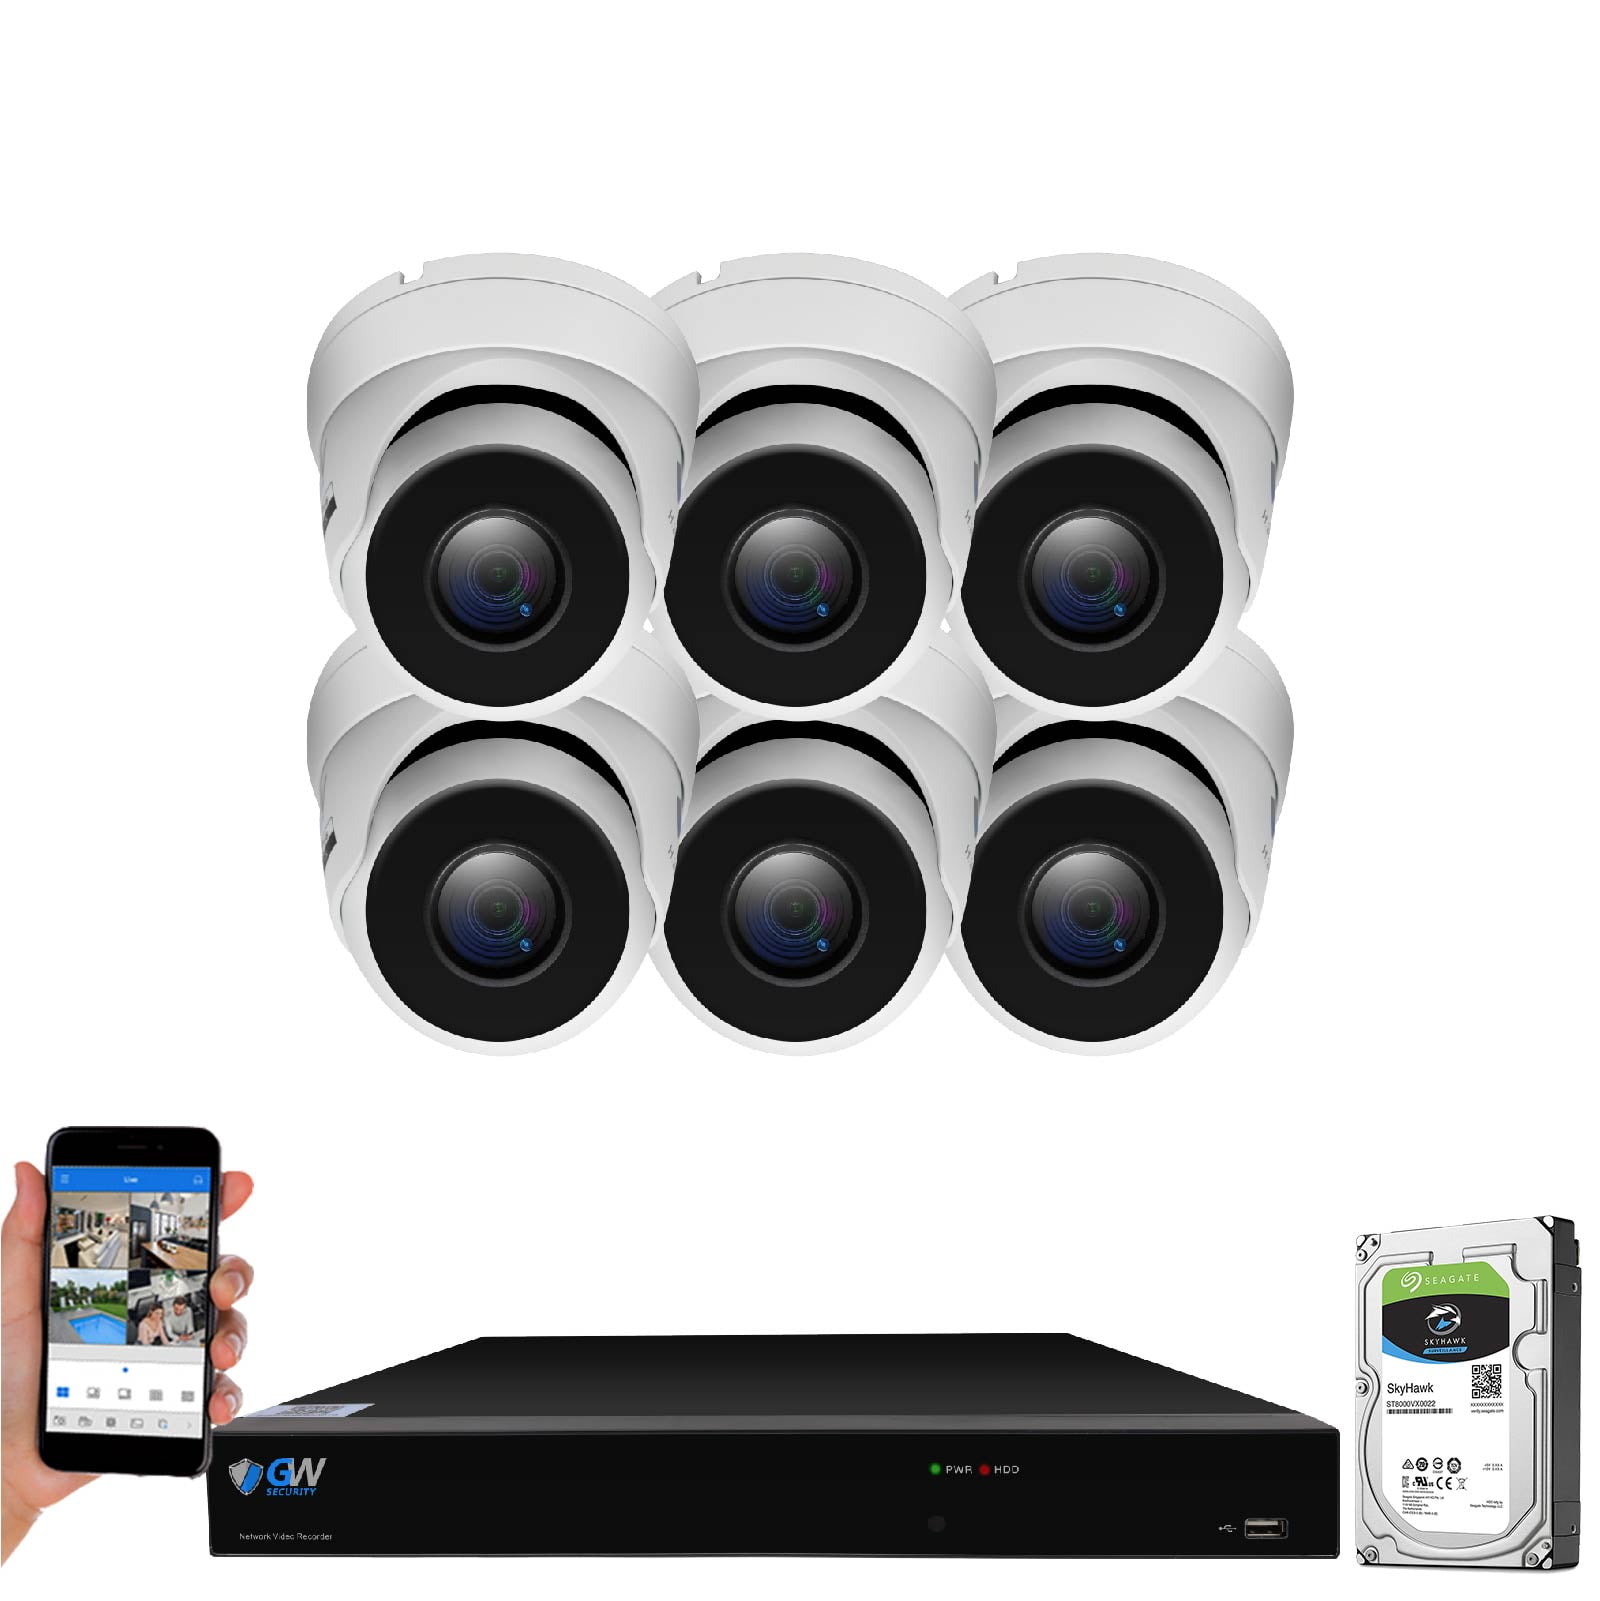 GW Channel H.265 PoE NVR UltraHD 4K (3840x2160) Security Camera System  with x 4K (8MP) 2160p IP Camera, 100ft Night Vision, Outdoor Indoor Dome  Camera